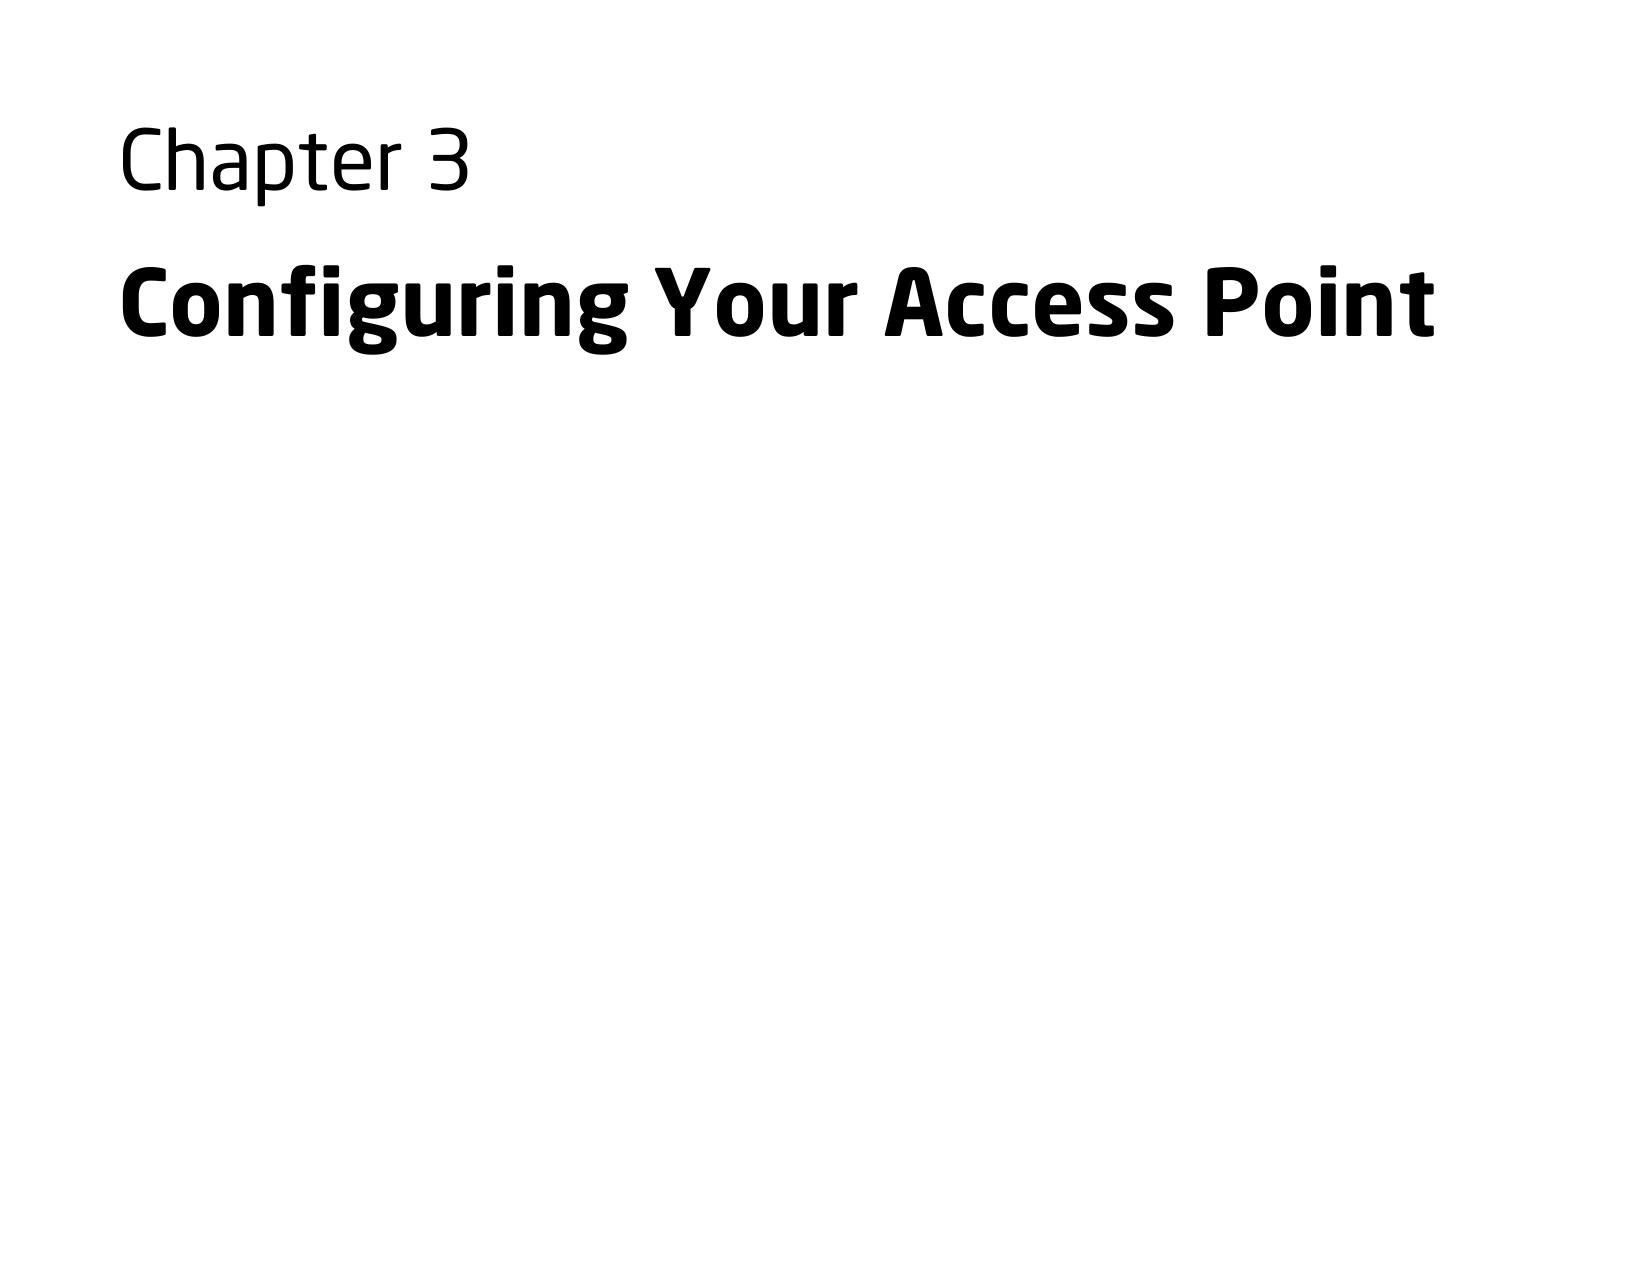 Chapter 3 Configuring Your Access Point   